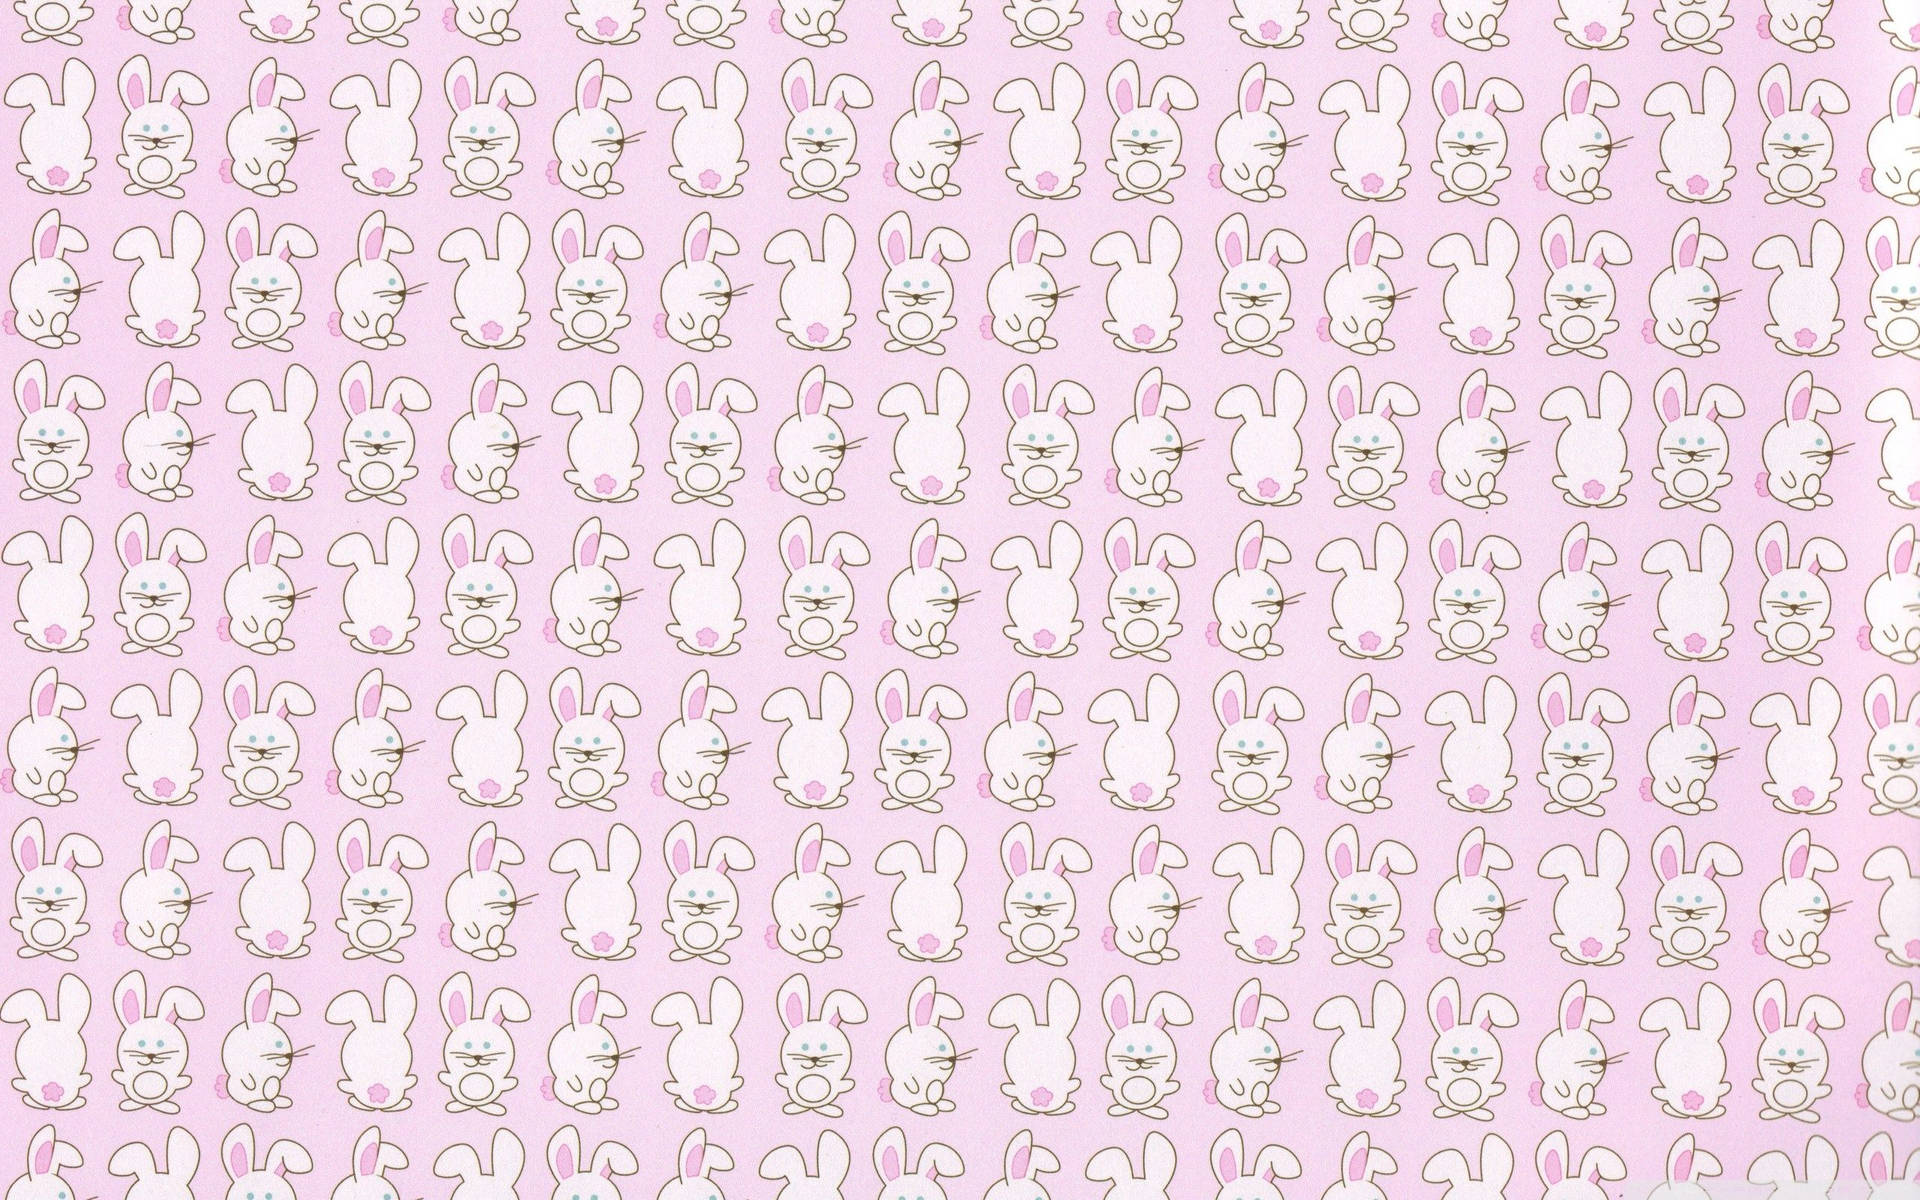 Cute Bunny In Different Perspectives